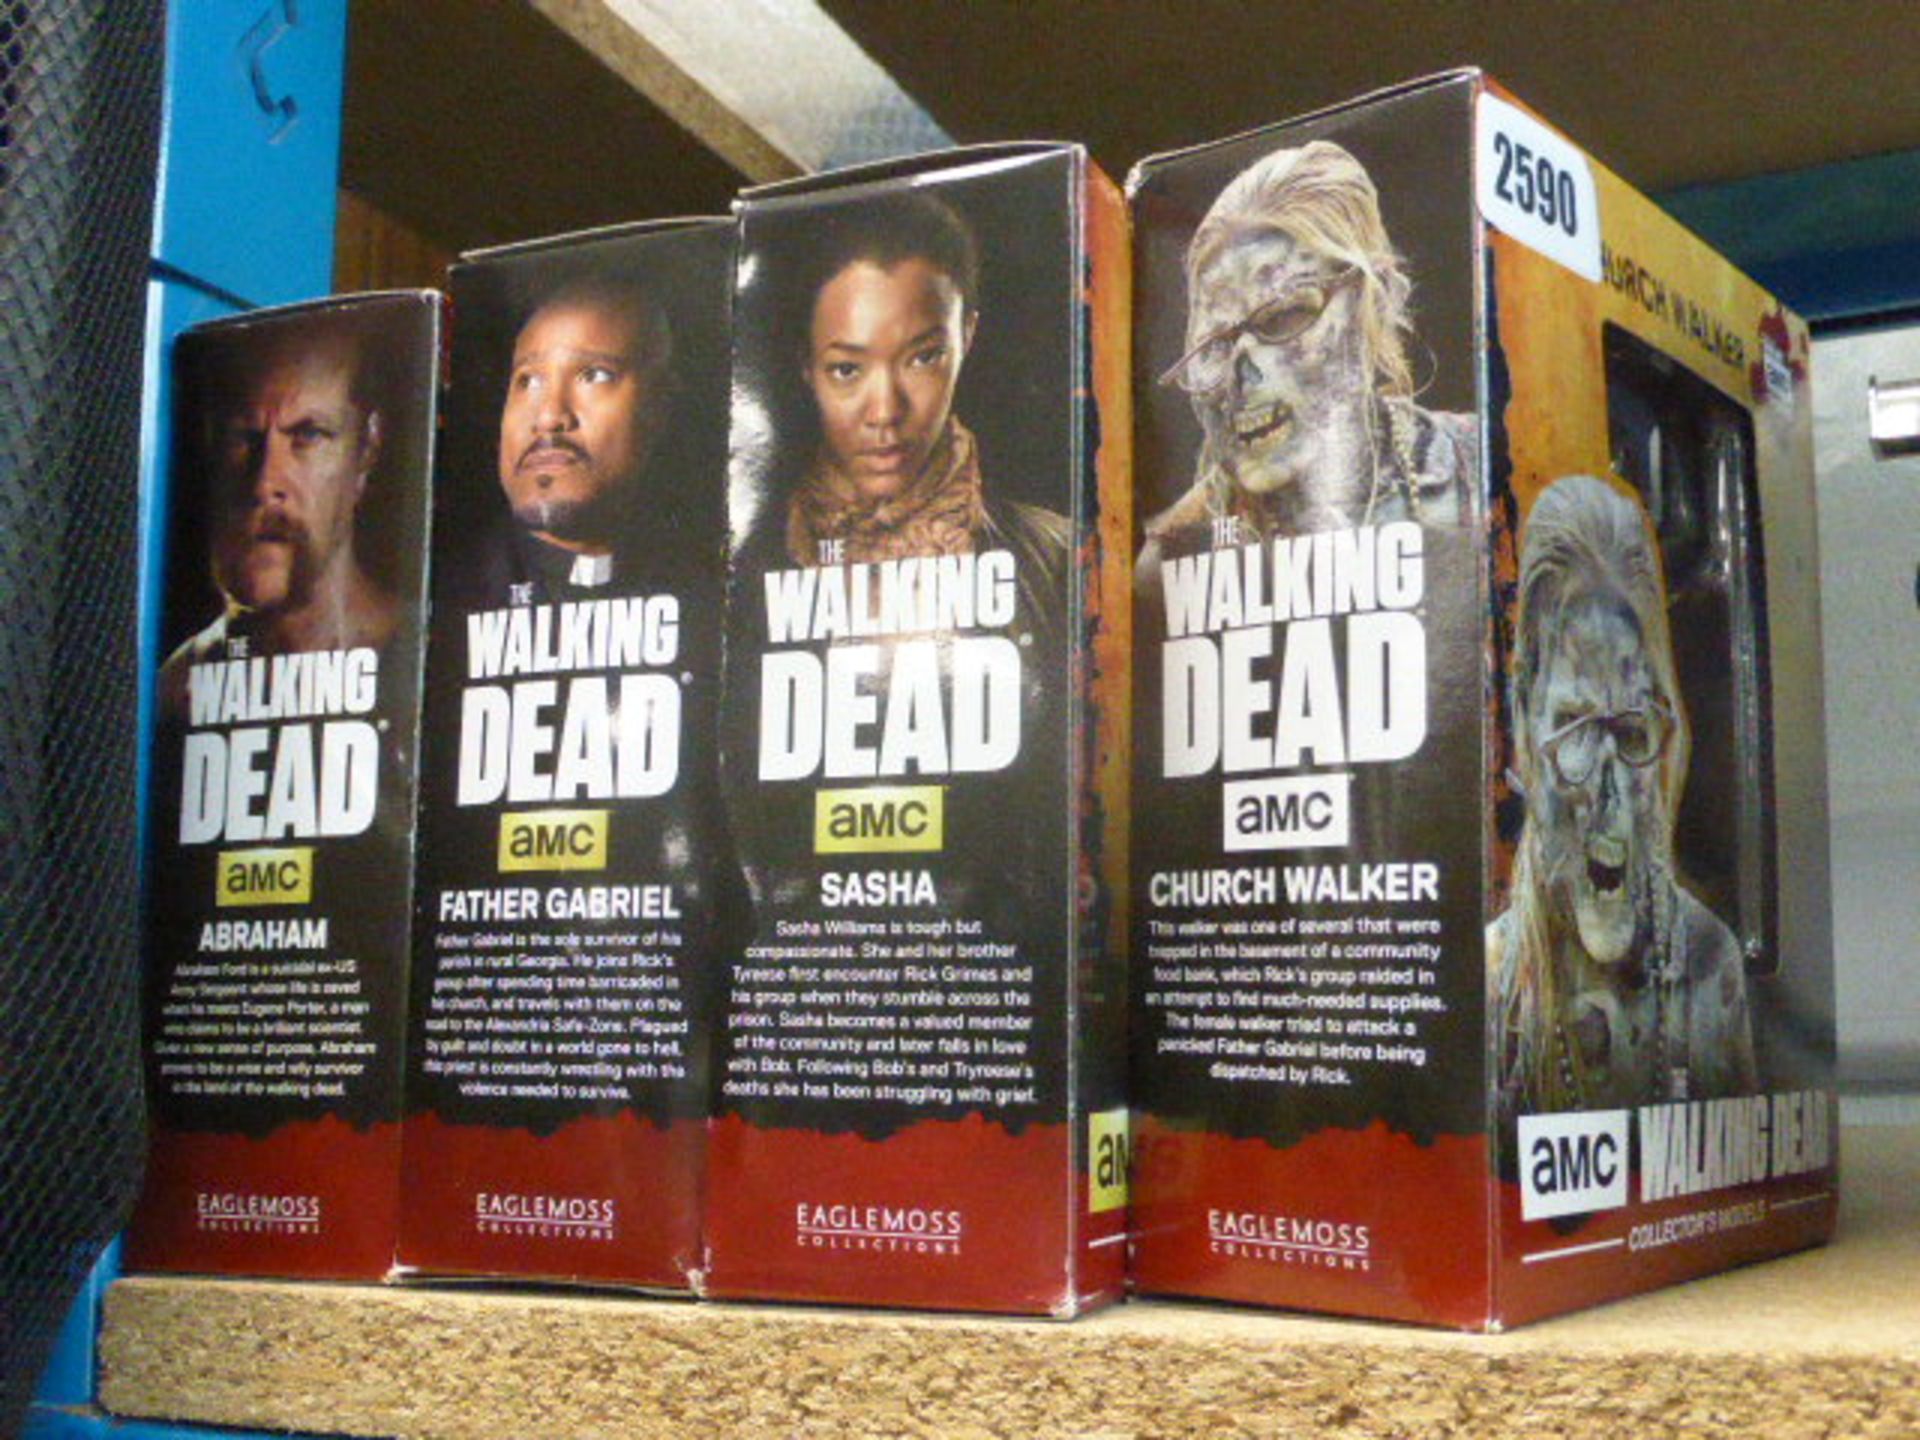 2501 4 AMCs The Walking Dead figurines incl. Abraham, Father Gabriel, Sasha and the church walker